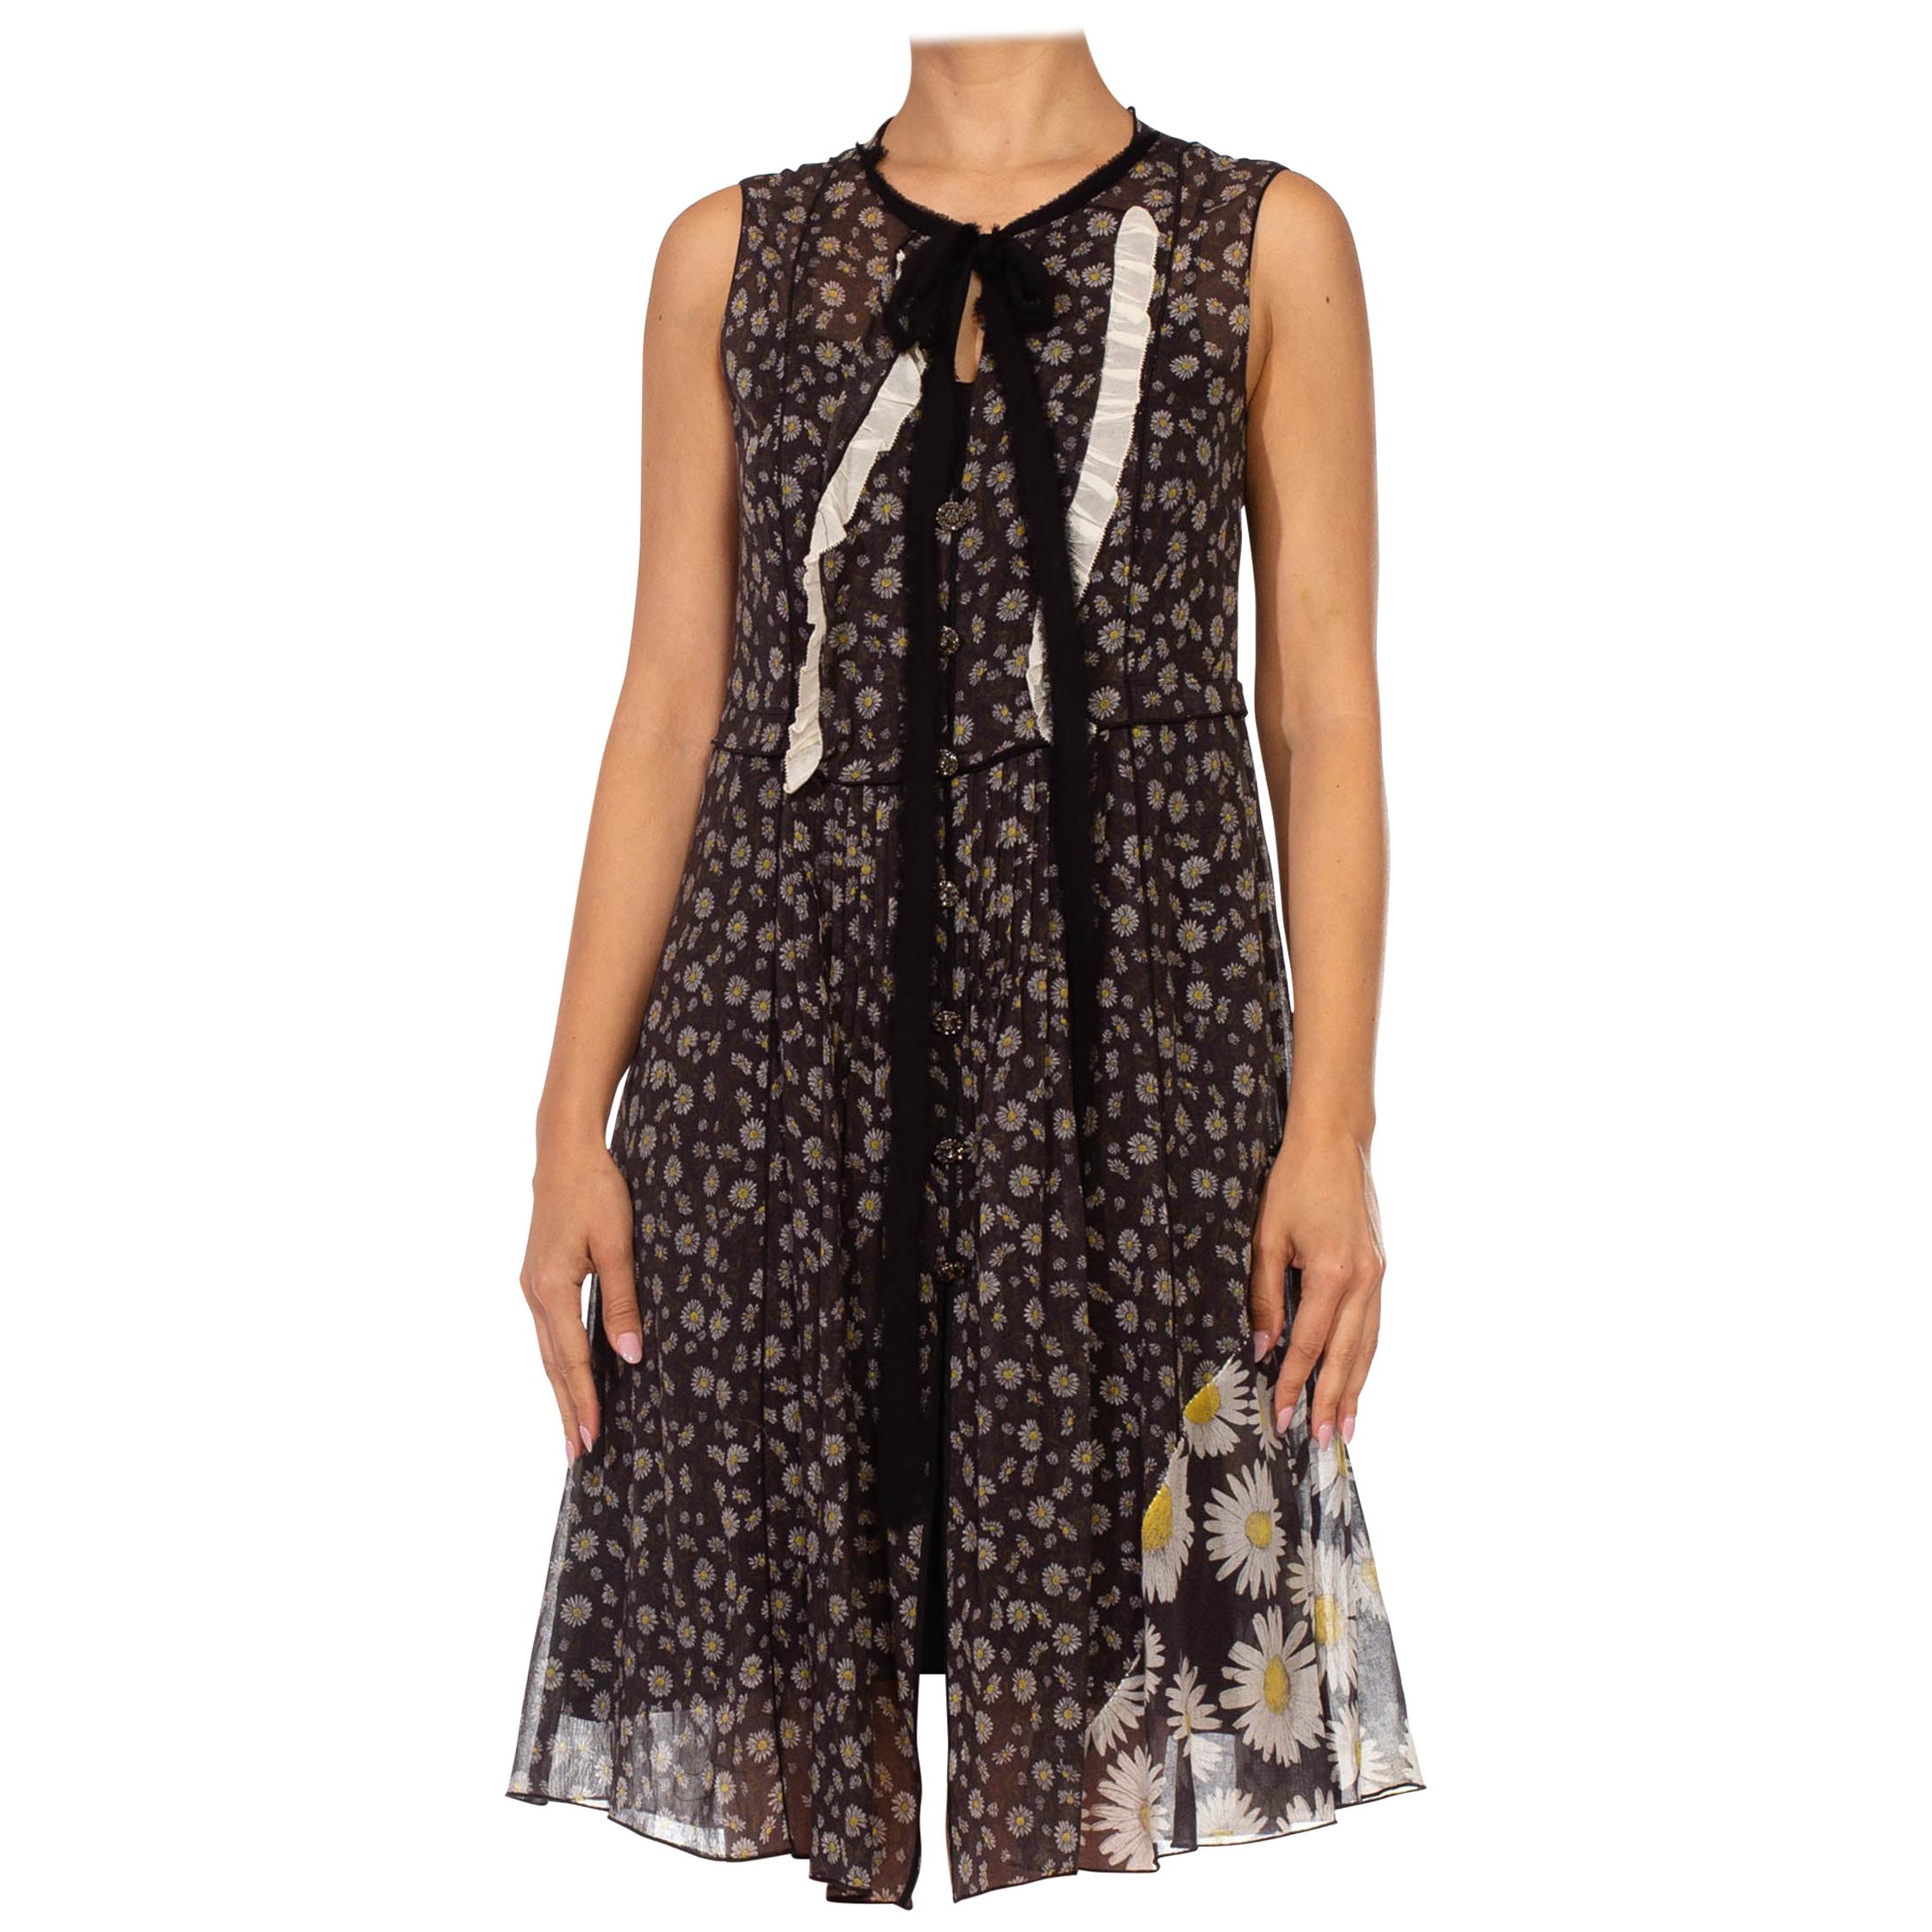 1990S MARC JACOBS Black Daisy Print Cotton Dress With Patchwork And Ruffle Deta For Sale